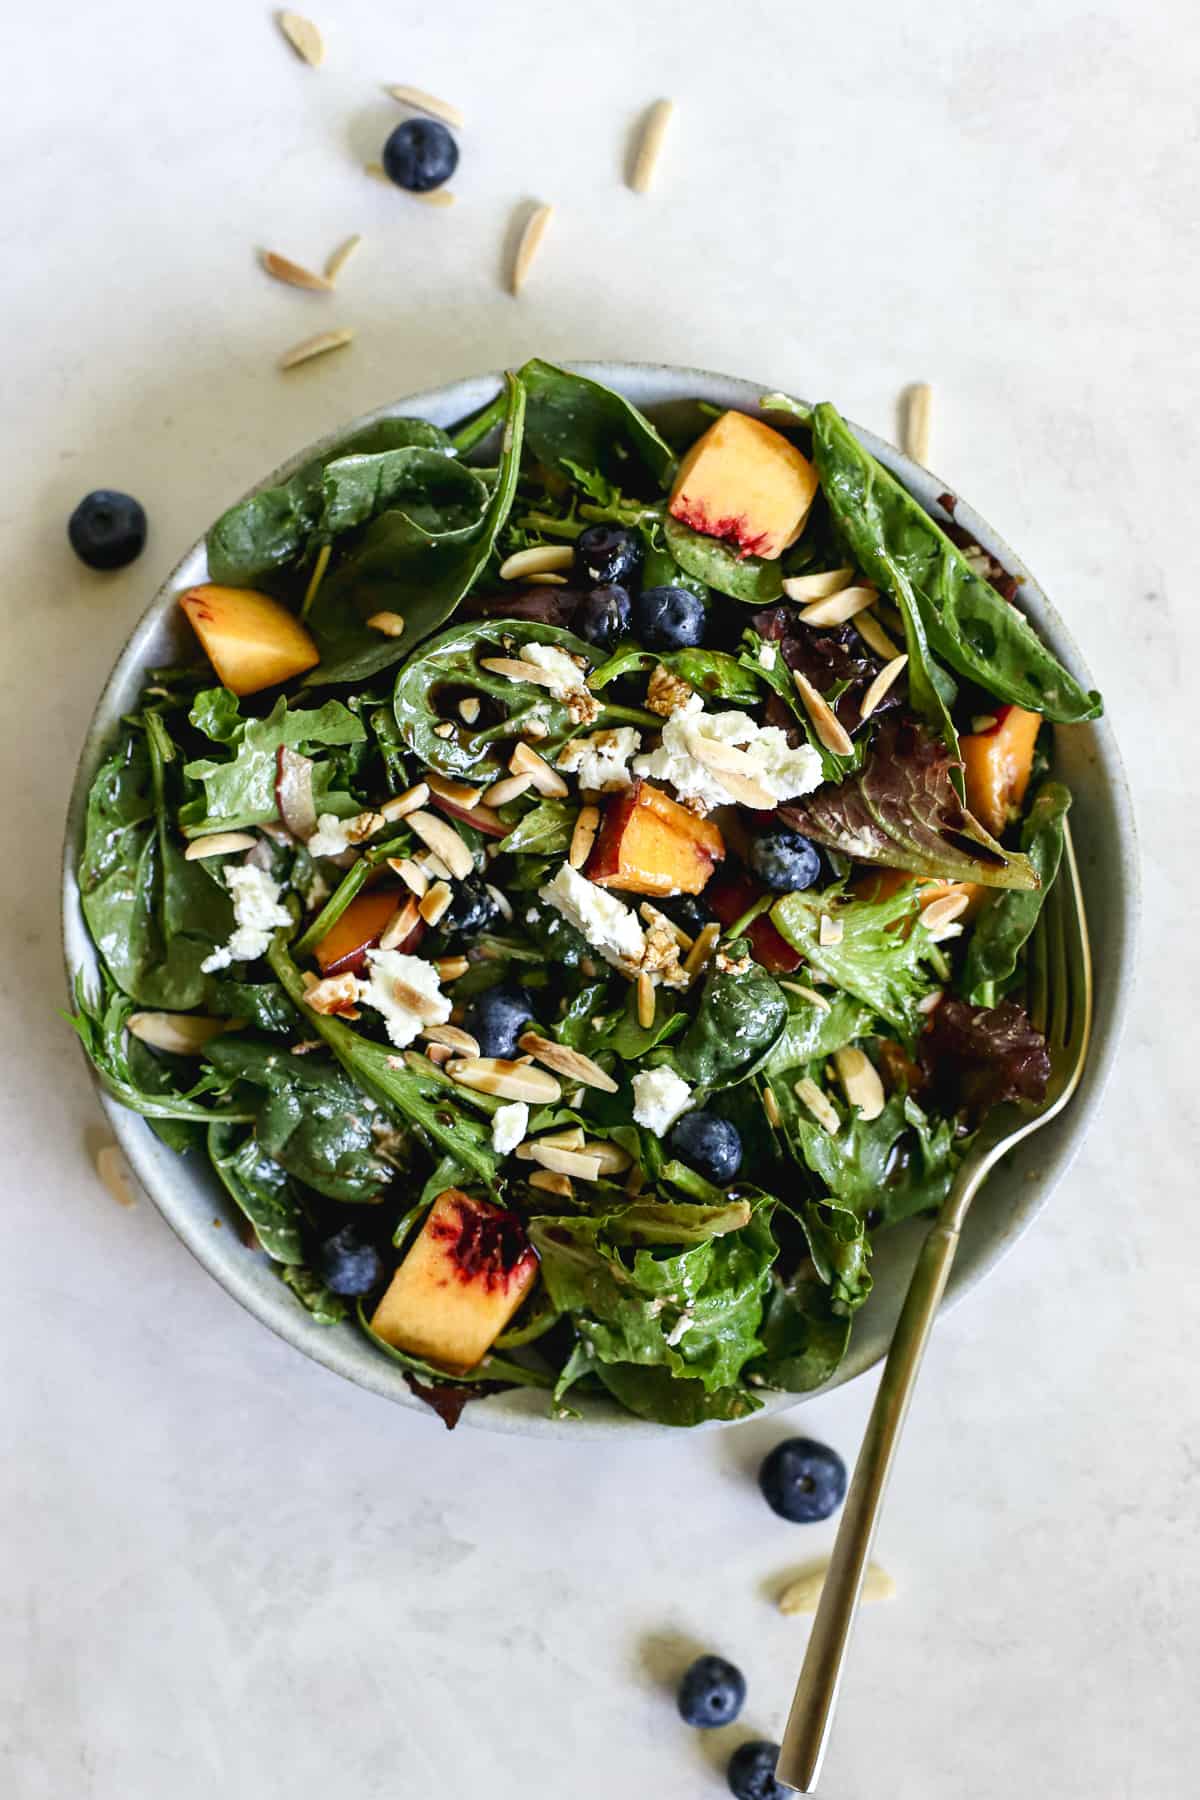 Peach blueberry salad in light blue bowl with golden fork, on light blue and white surface